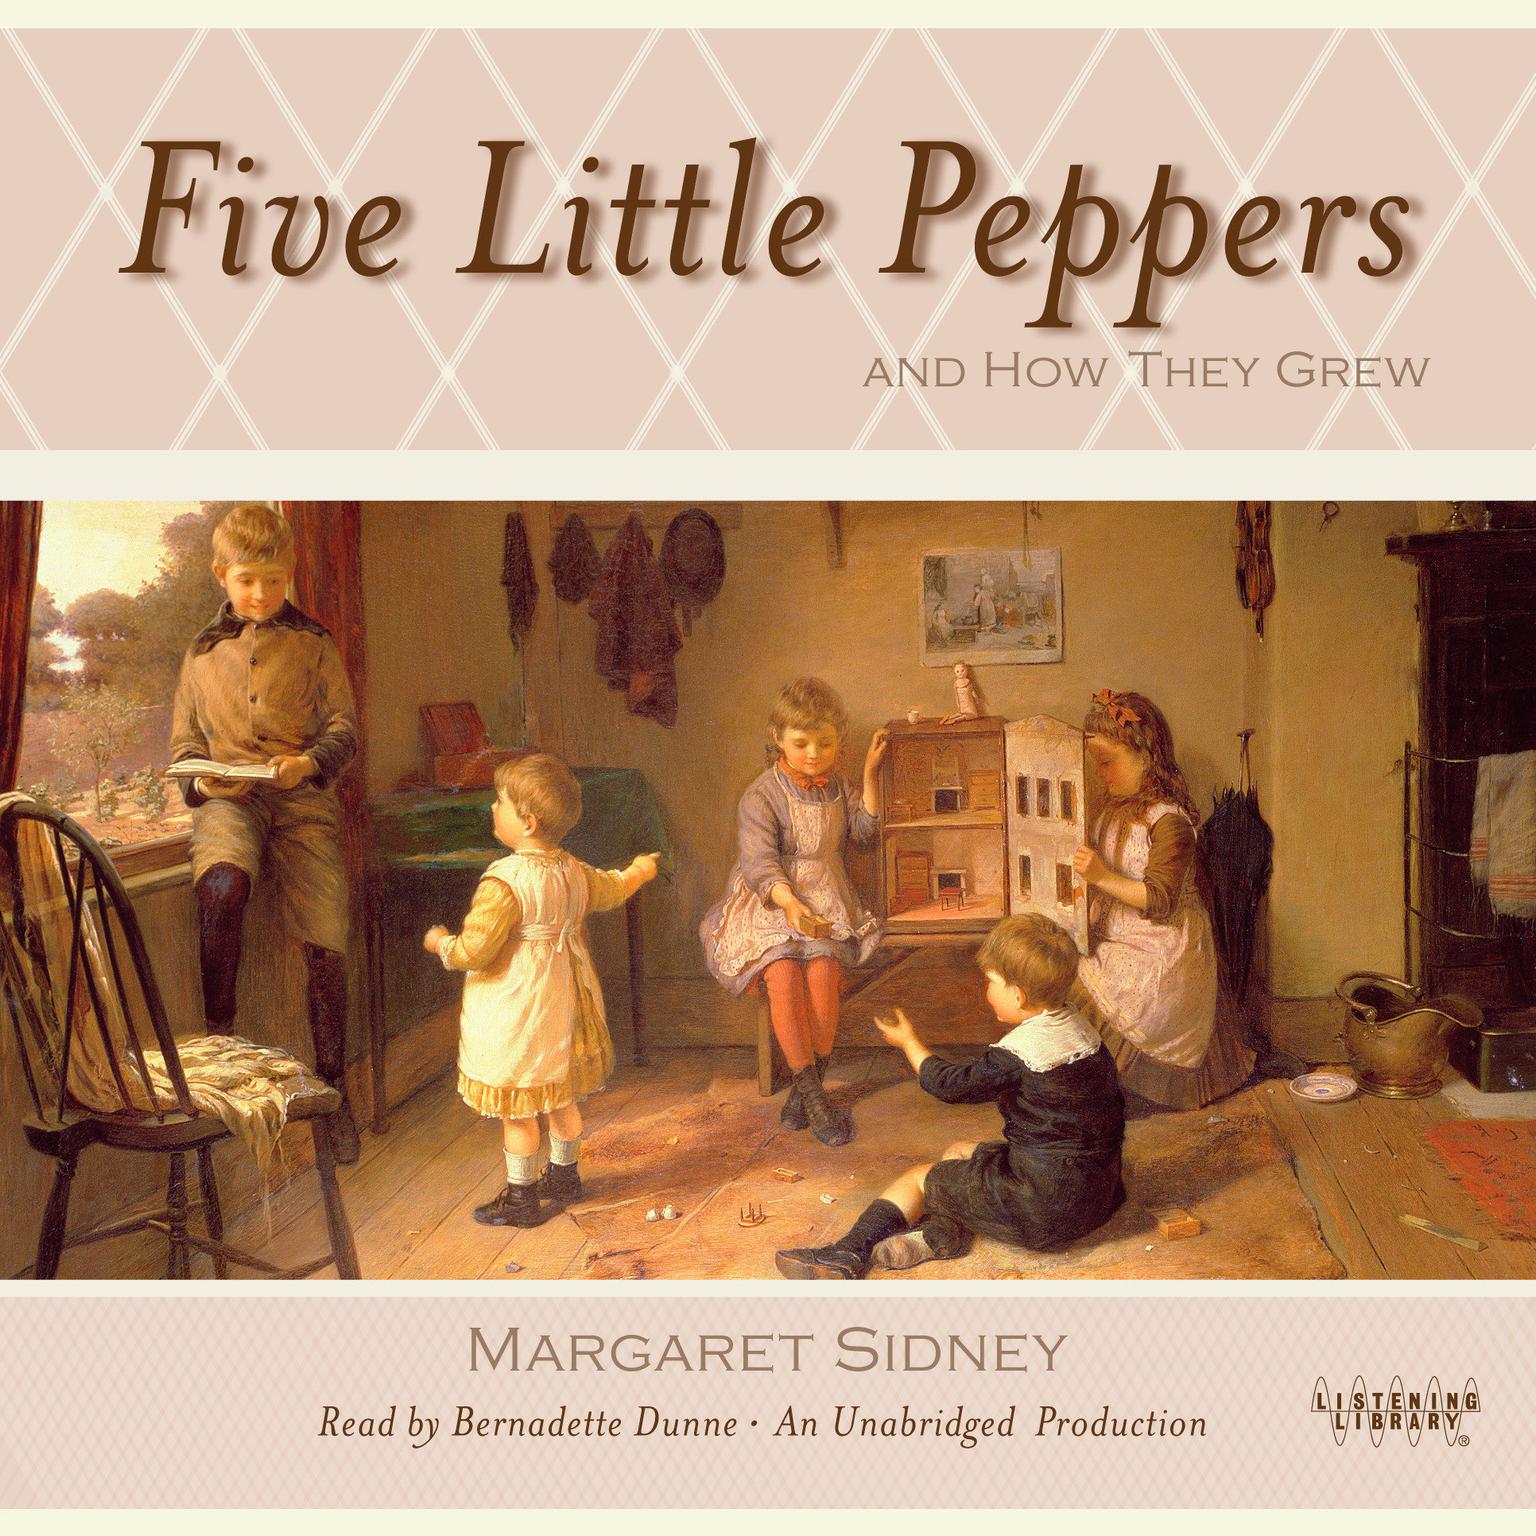 Five Little Peppers and How They Grew Audiobook, by Margaret Sidney